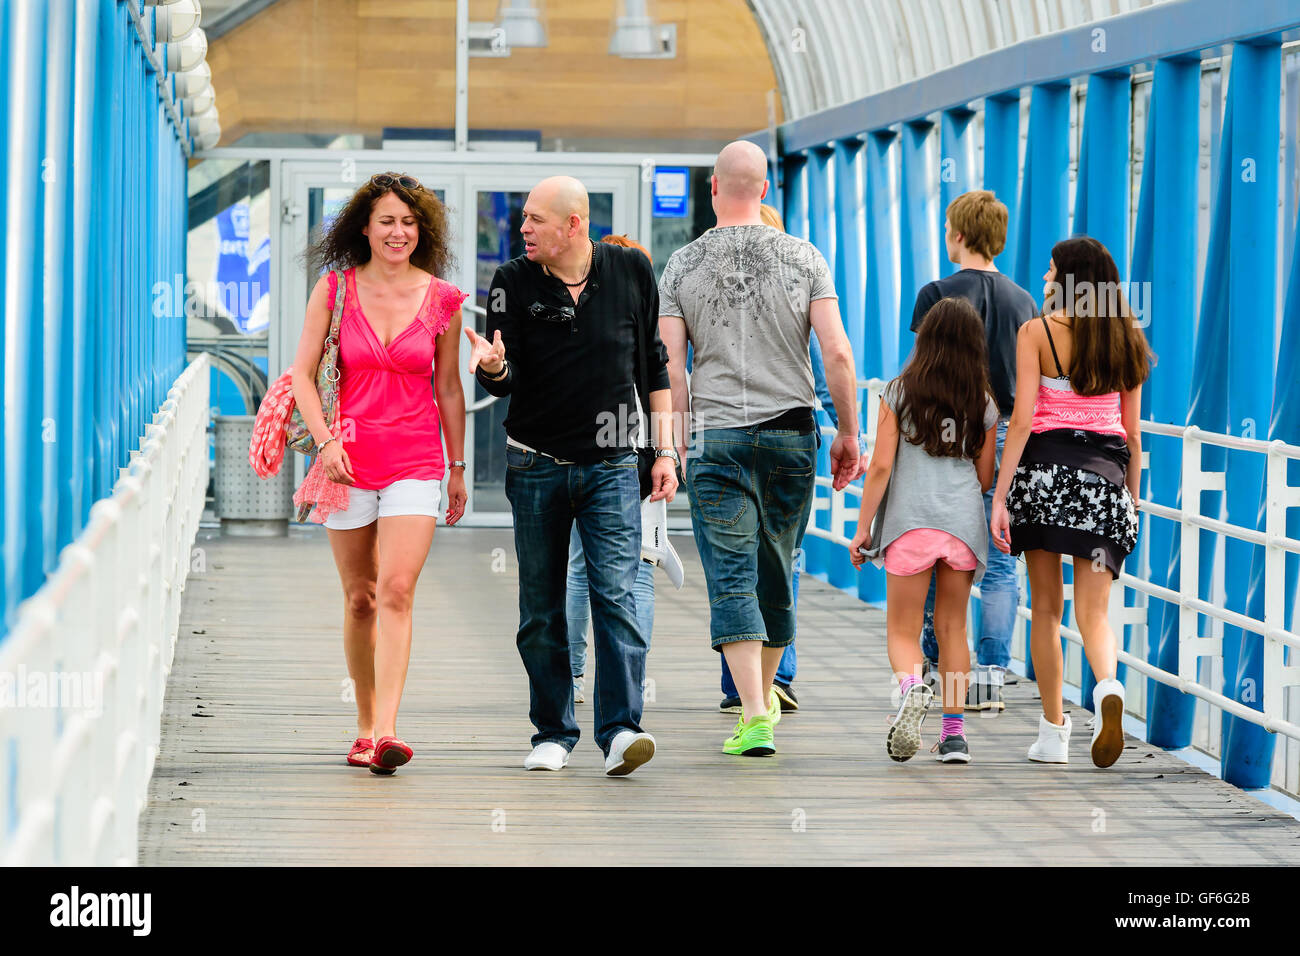 Goteborg, Sweden - July 25, 2016: Unknown people walking across an elevated public walkway. Attractive female and man walking to Stock Photo